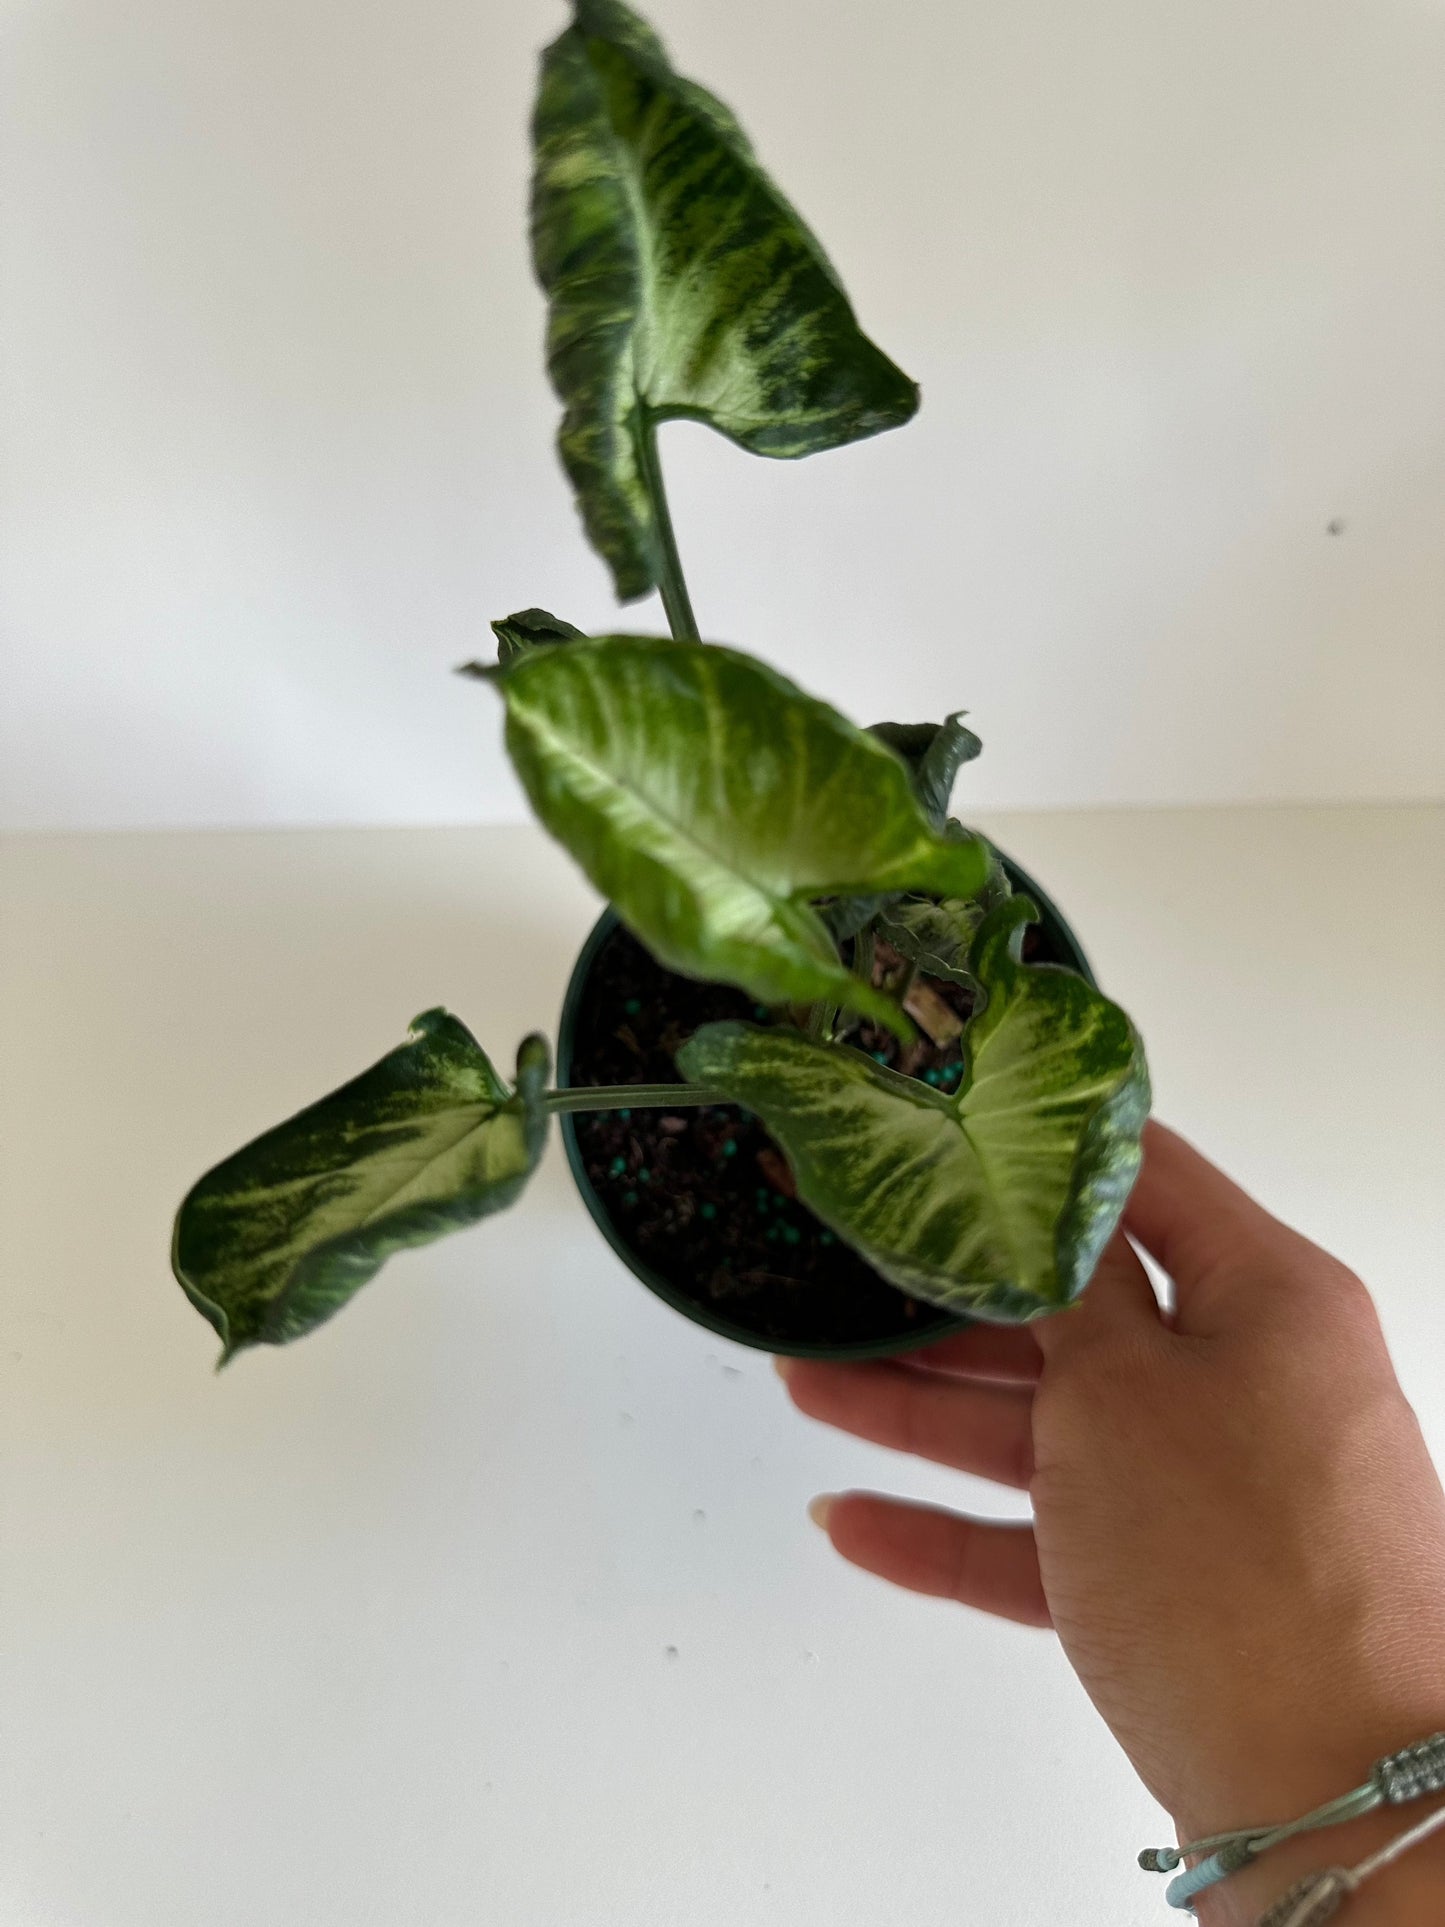 Syngonium 'Godzilla'- Climbing Variety With Green & White Contorted Leaves- Tropical Houseplant- (4 Inch Nursery Pot)